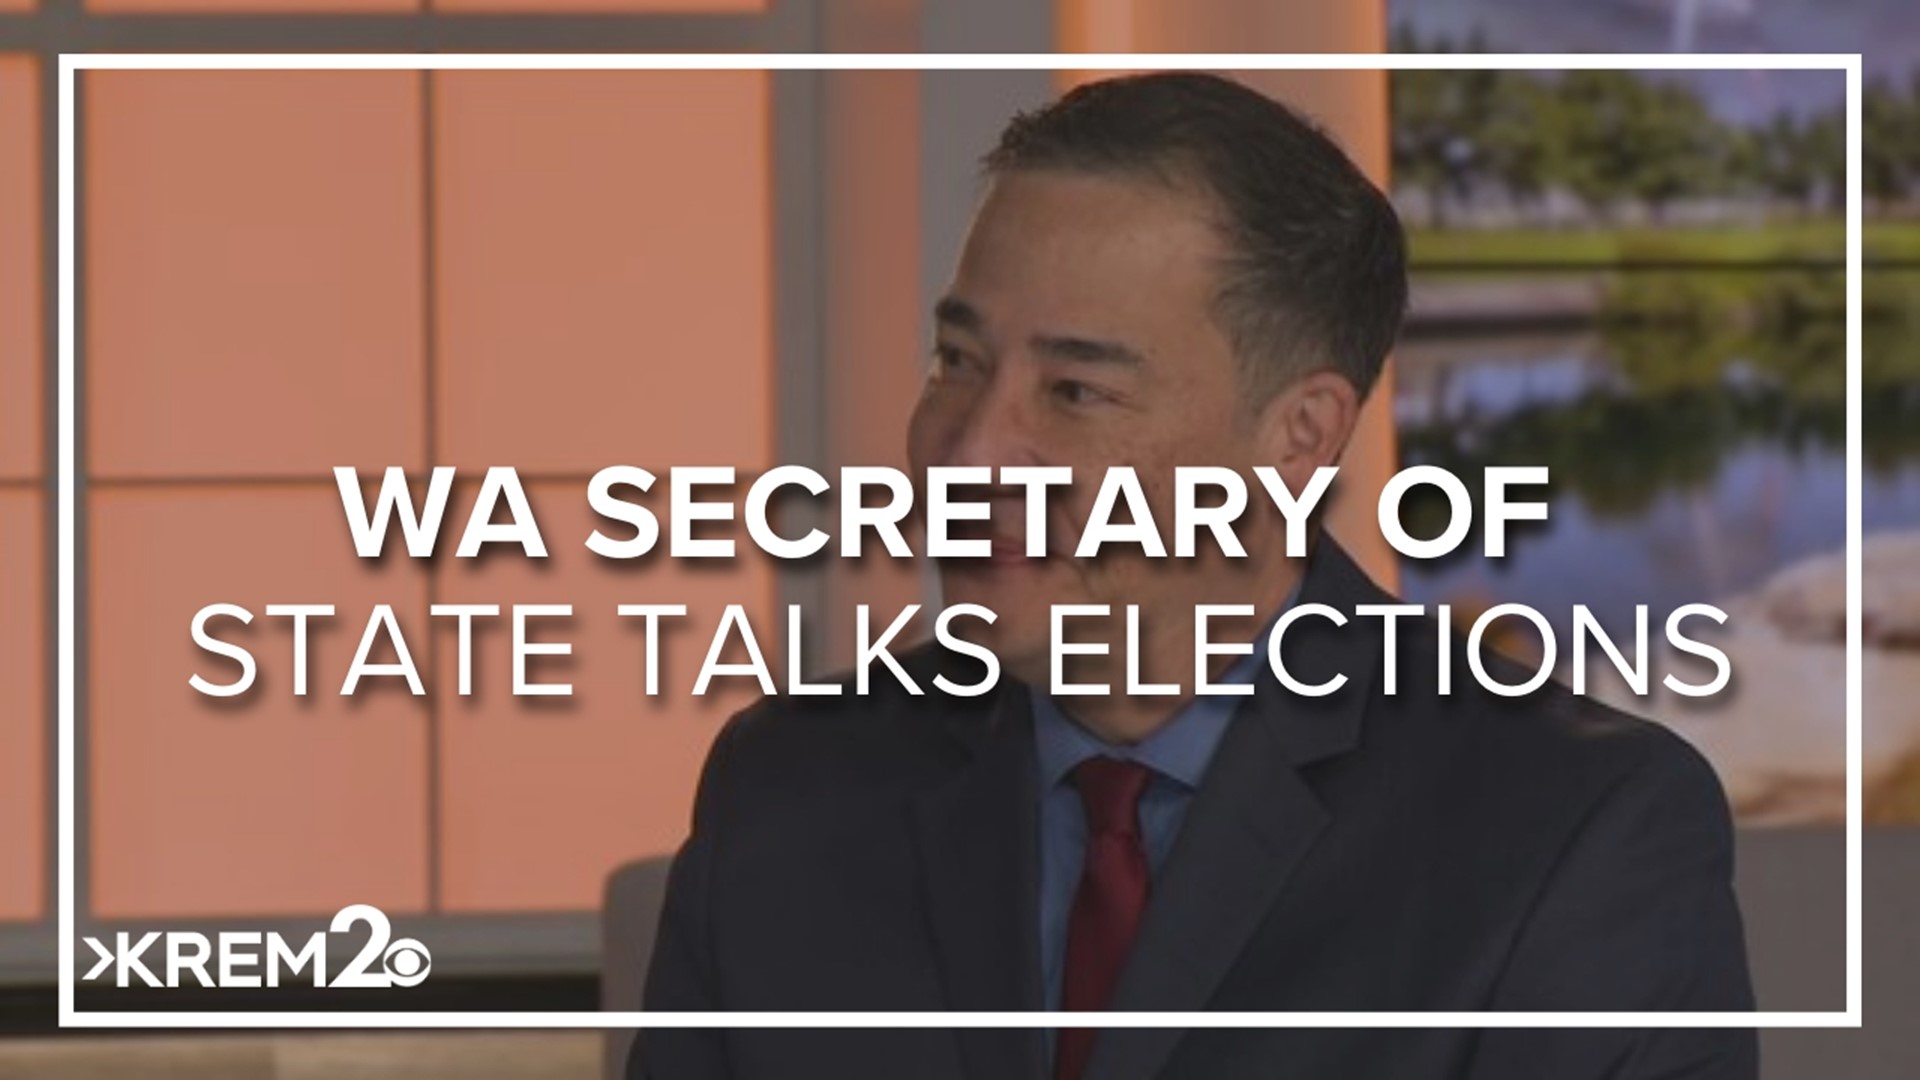 Secretary of State Steve Hobbs talked about difficulties getting young adults to vote and his thoughts on election integrity in Washington.